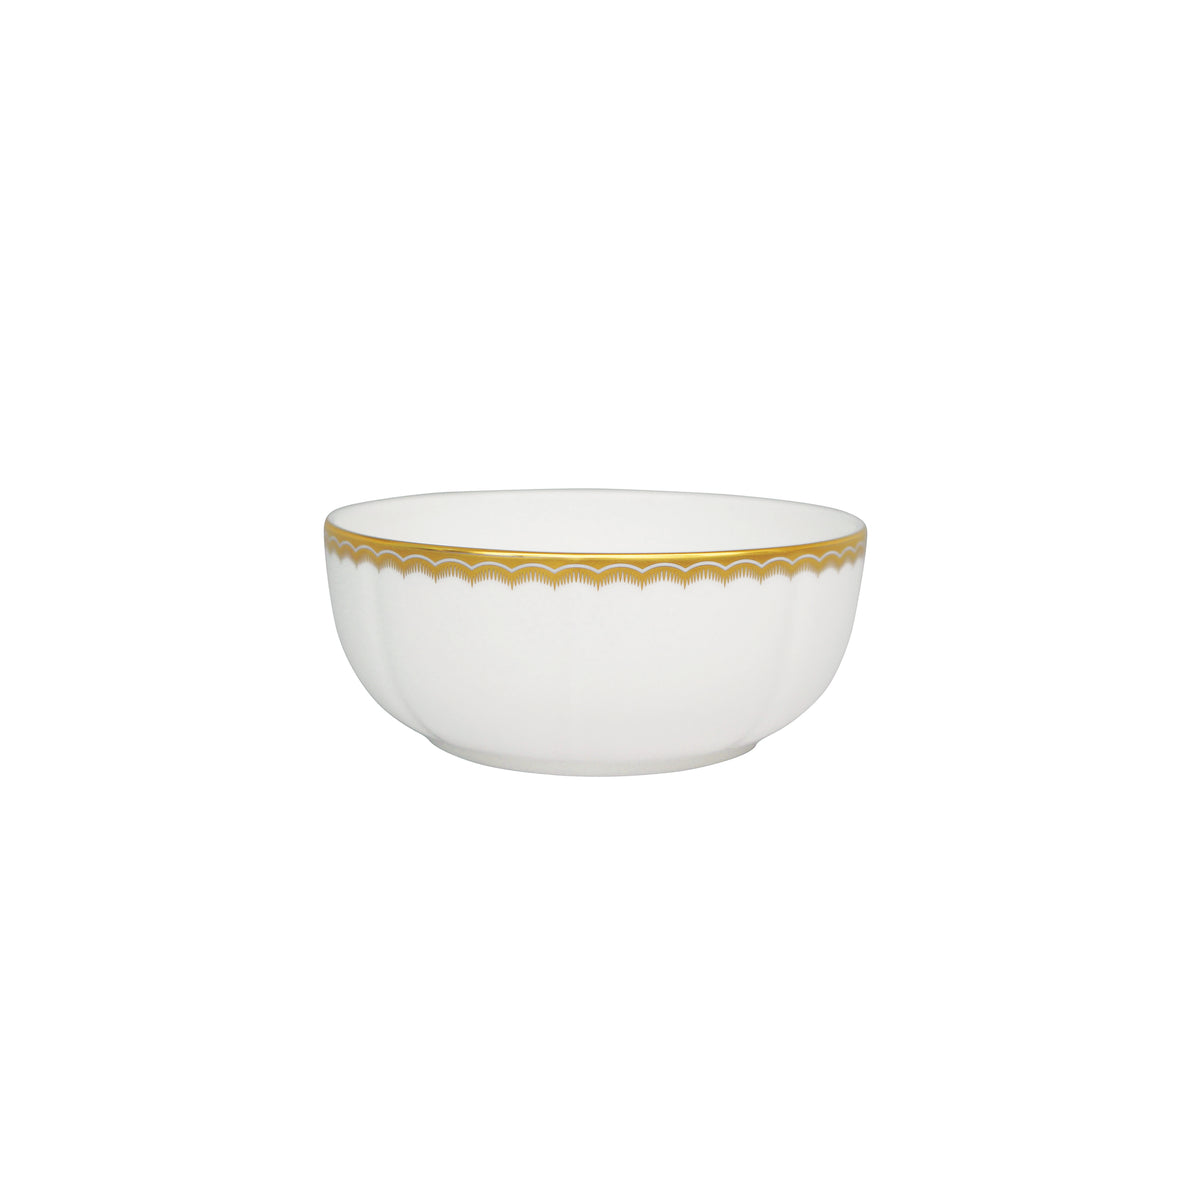 Prouna Antique gold Cereal bowl 